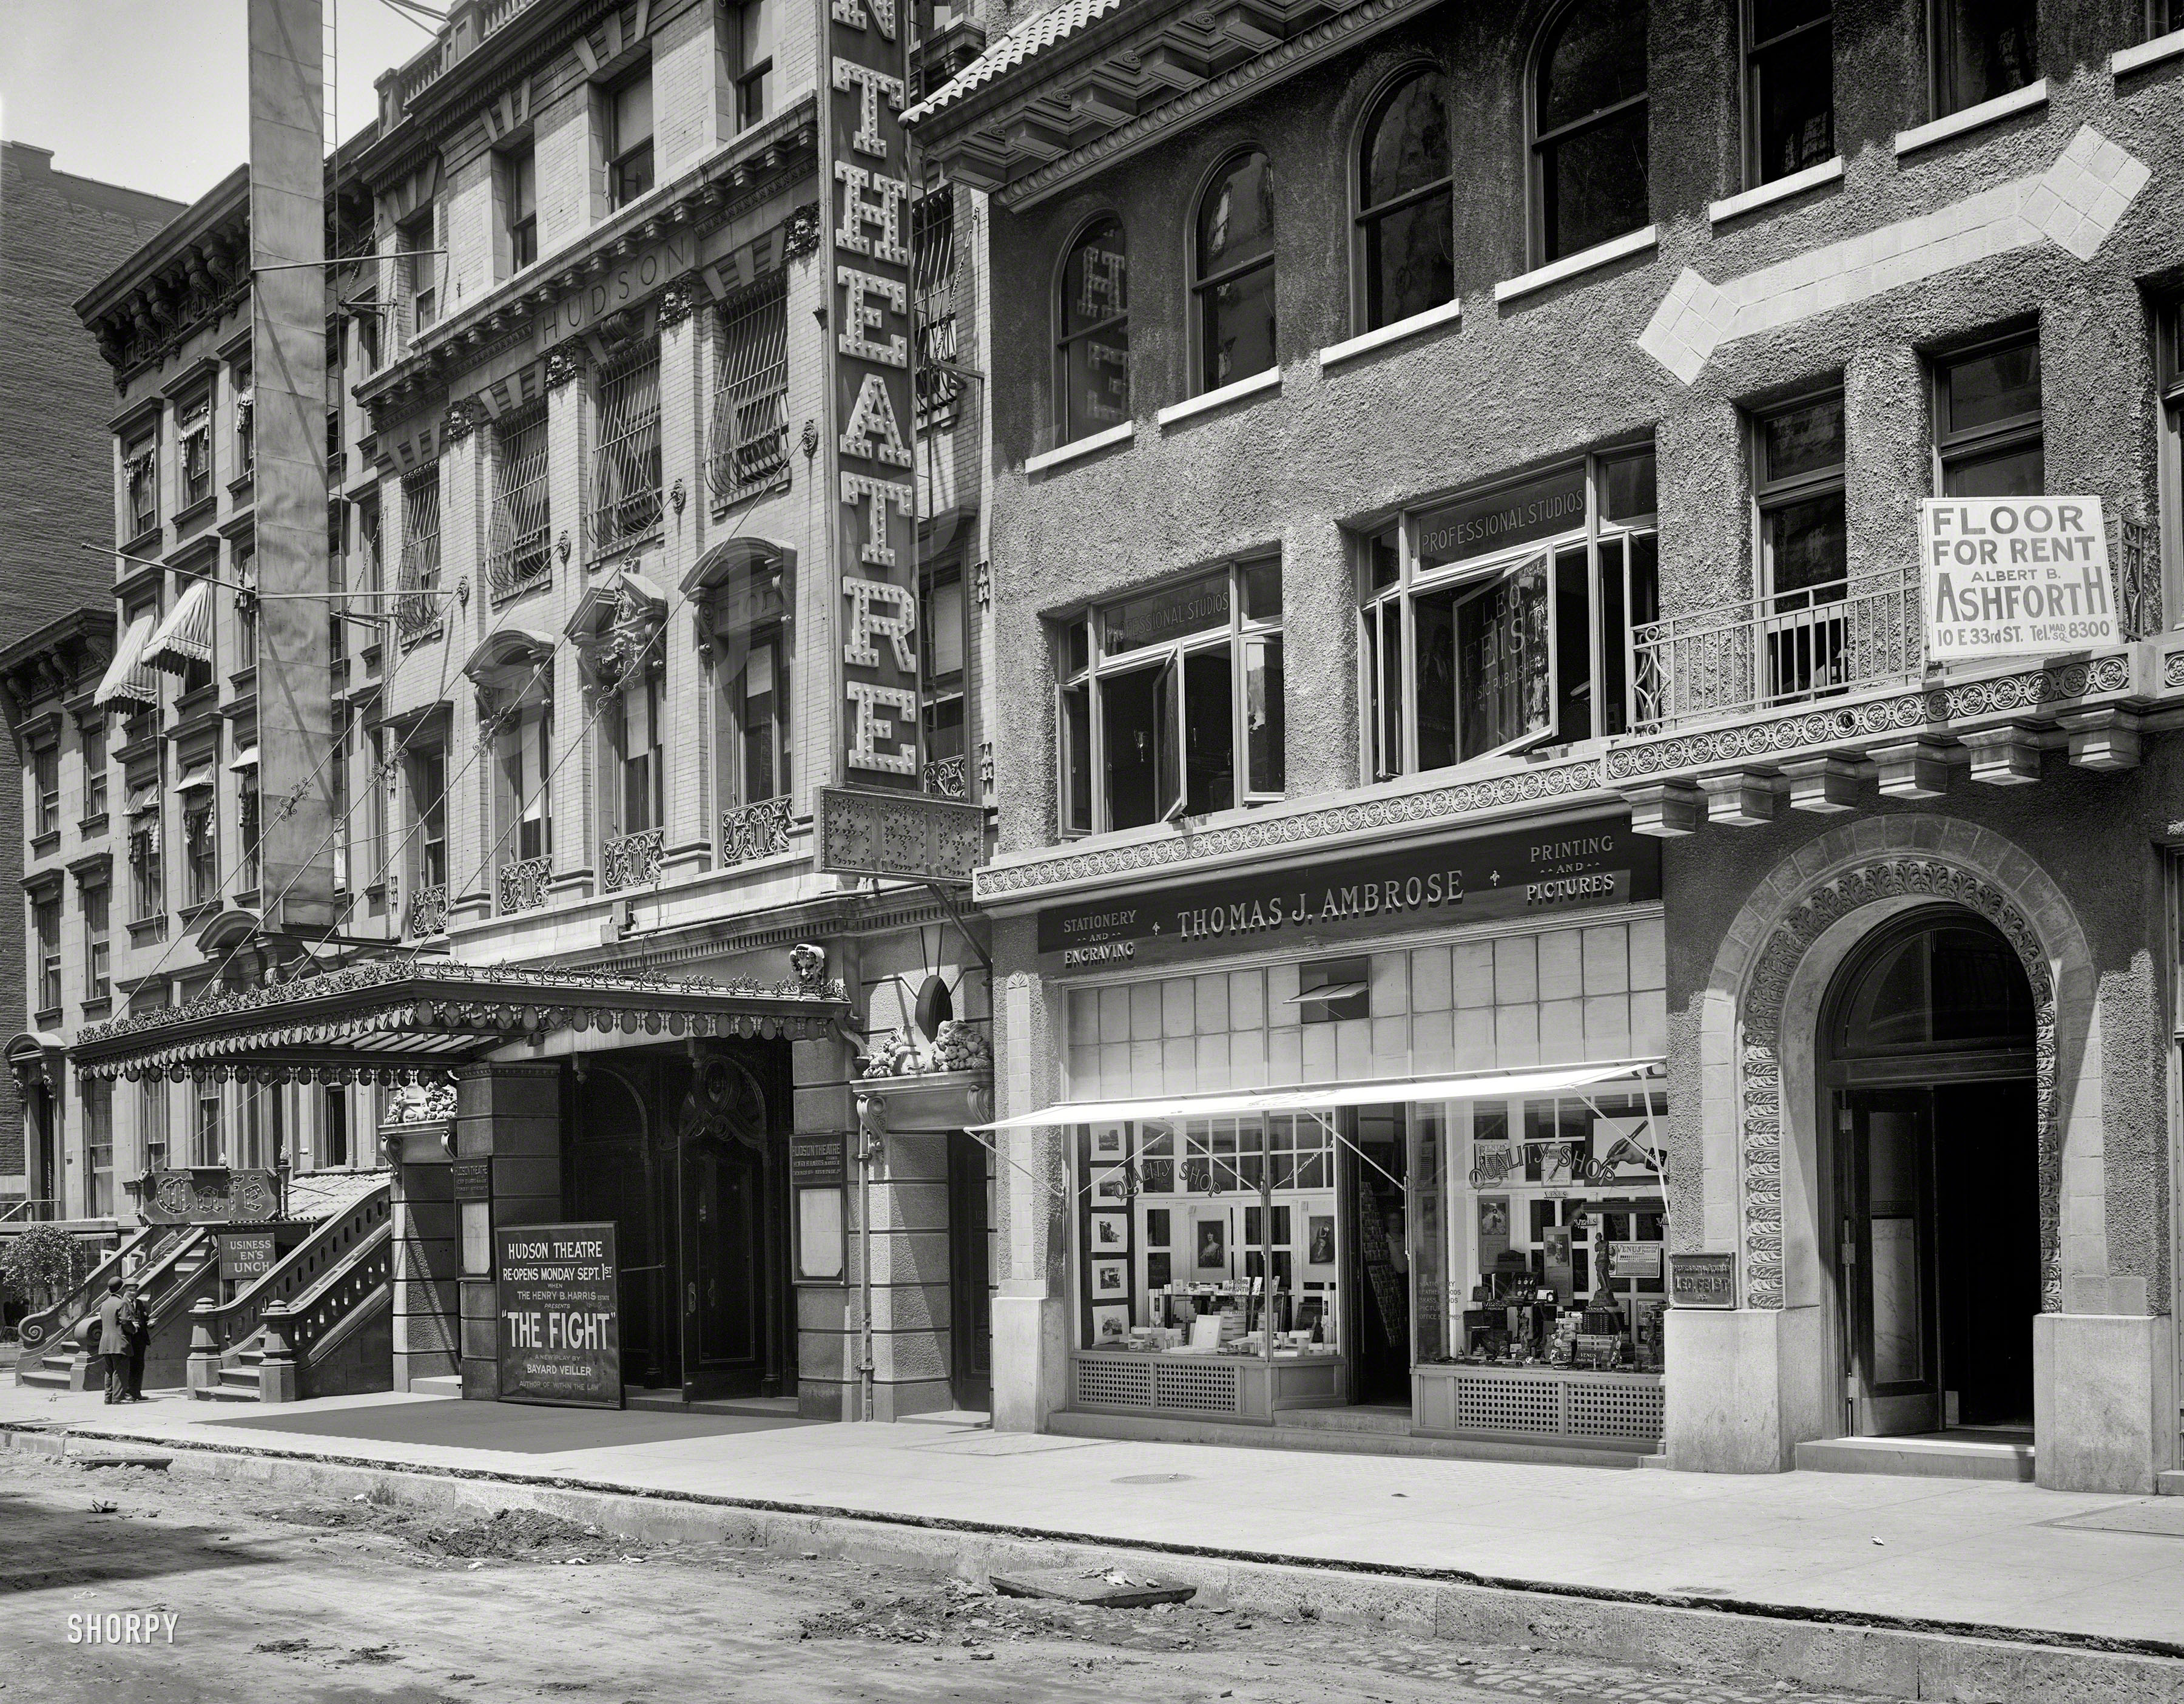 New York, 1913. "Quality Shop and Hudson Theatre." Where the audience for Bayard Veiller's drama The Fight included a grand jury probing charges that the play was "indecent and a public nuisance." 8x10 glass negative. View full size.